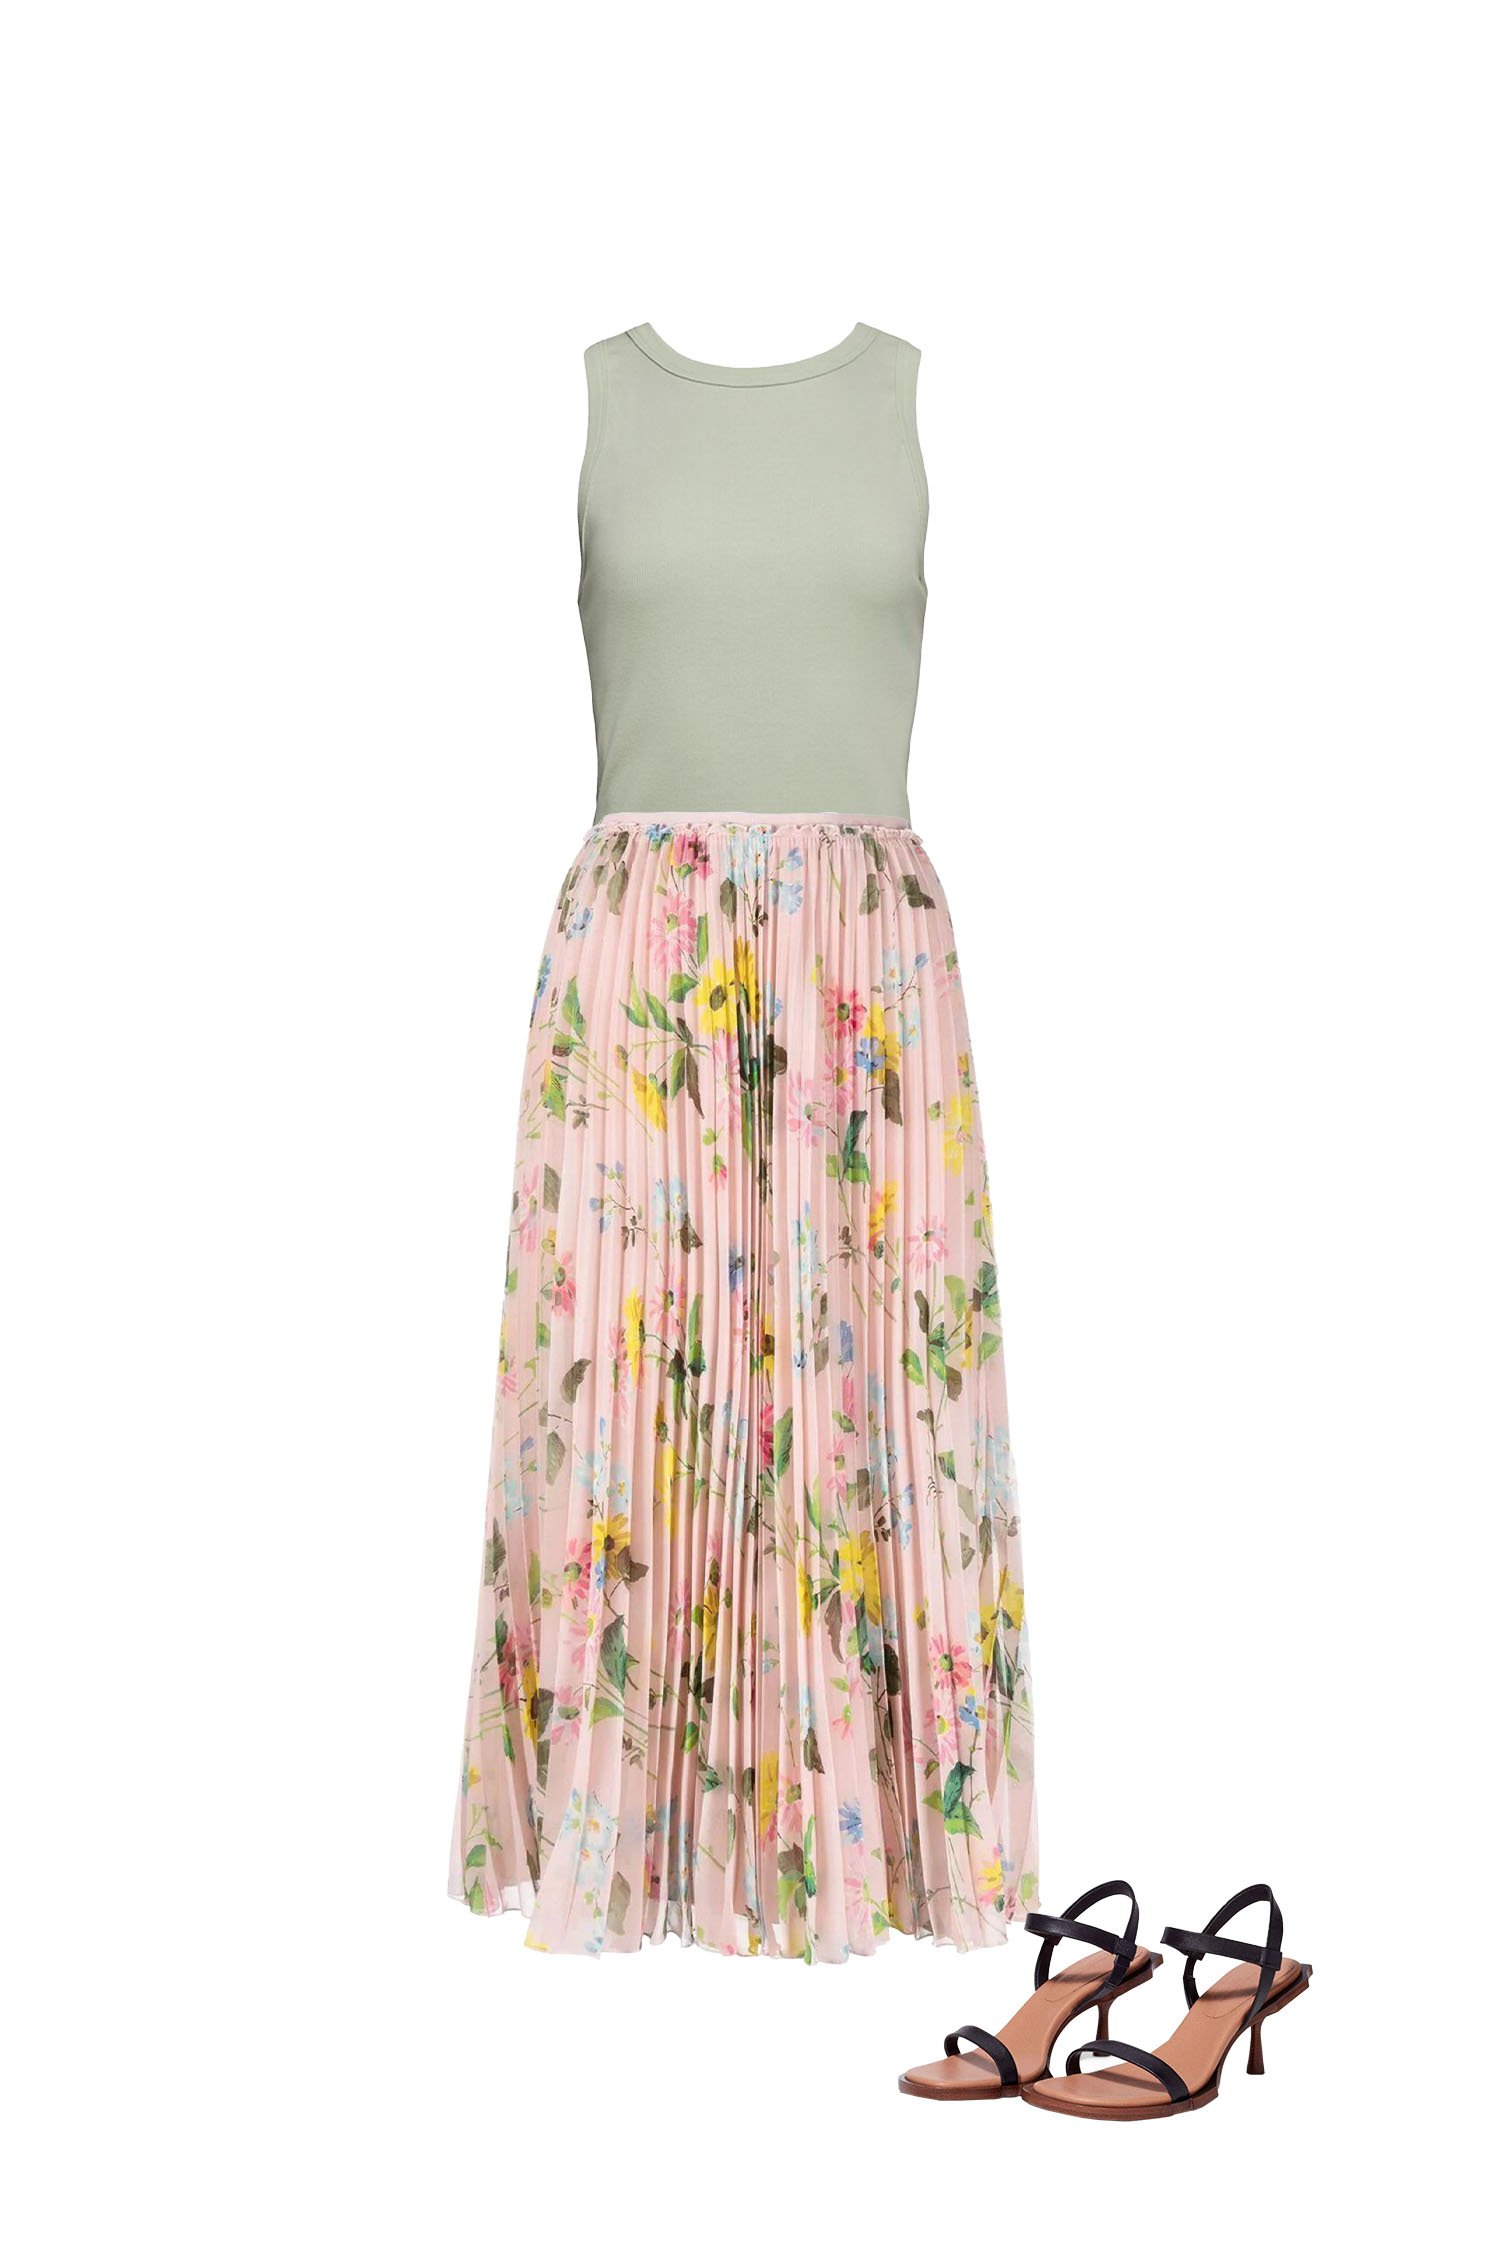 Pink Floral Pleated Skirt with Sage Green Sleeveless Top Outfit